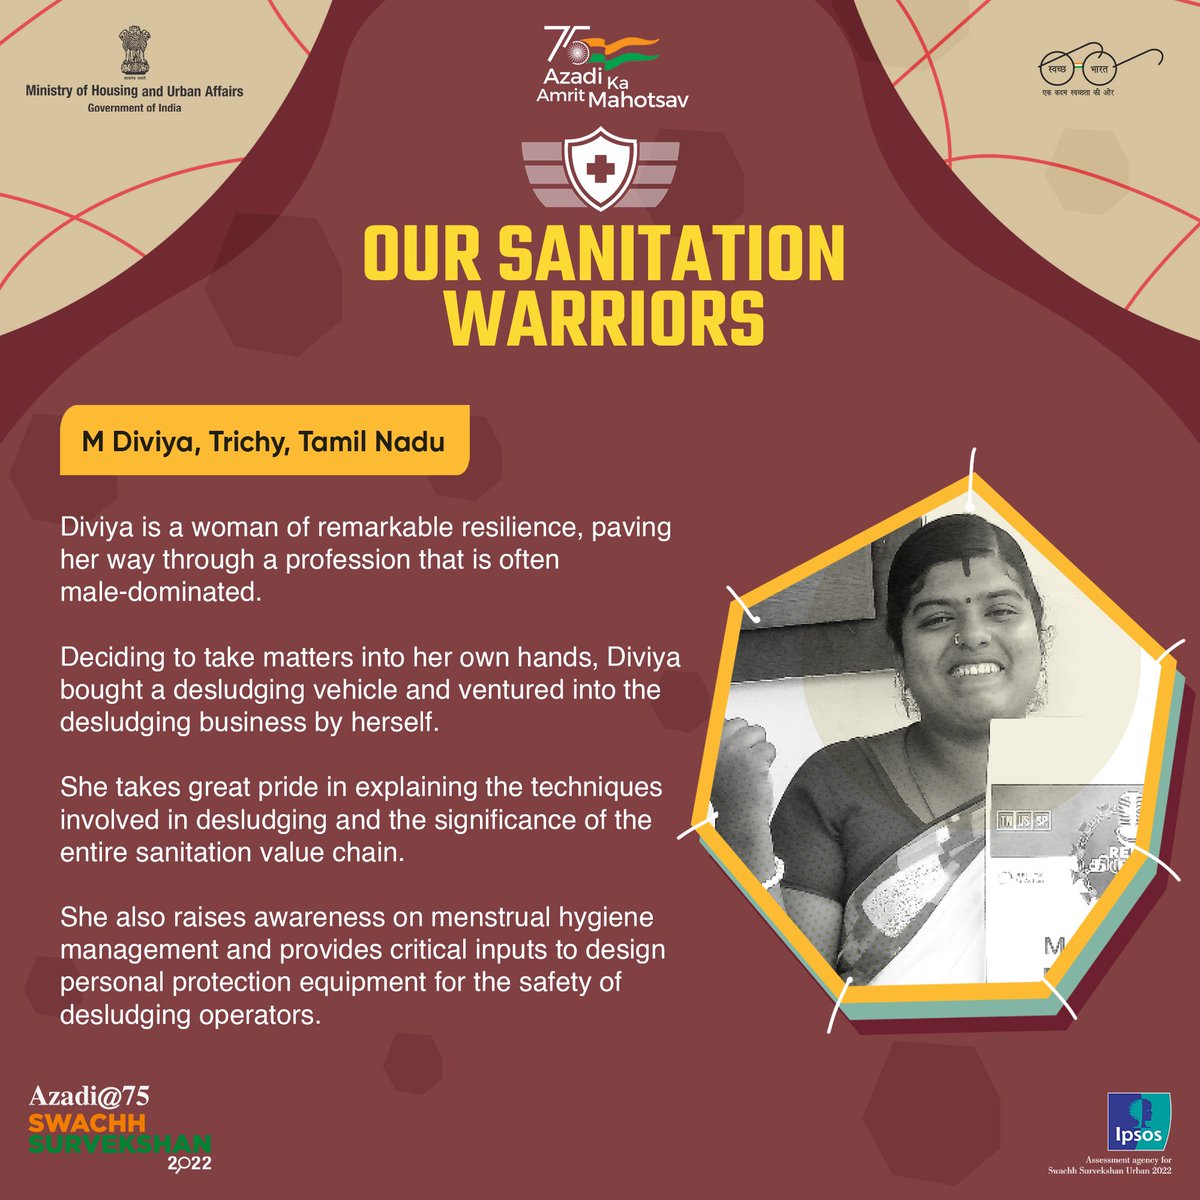 Diviya is a woman of remarkable resilience, paving her way through the desludging profession that is often male-dominated, and is a voice for the cause of the sanitation value chain. She is a sanitation warrior and this is her story. #SwachhSurvekshan2022